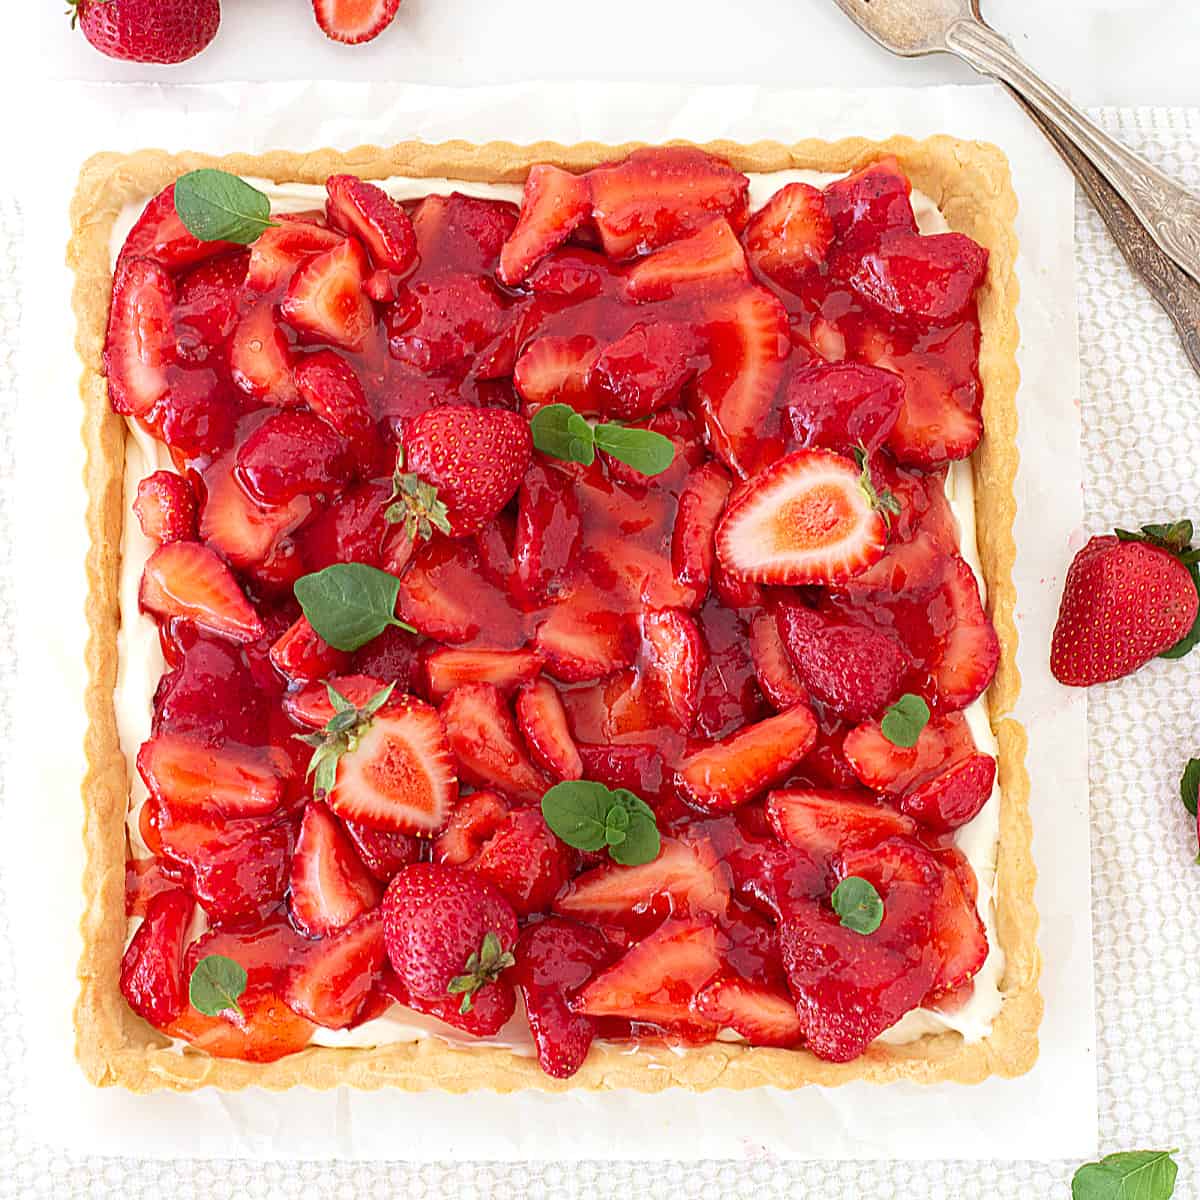 Square strawberry tart with mint leaves on a white surface.